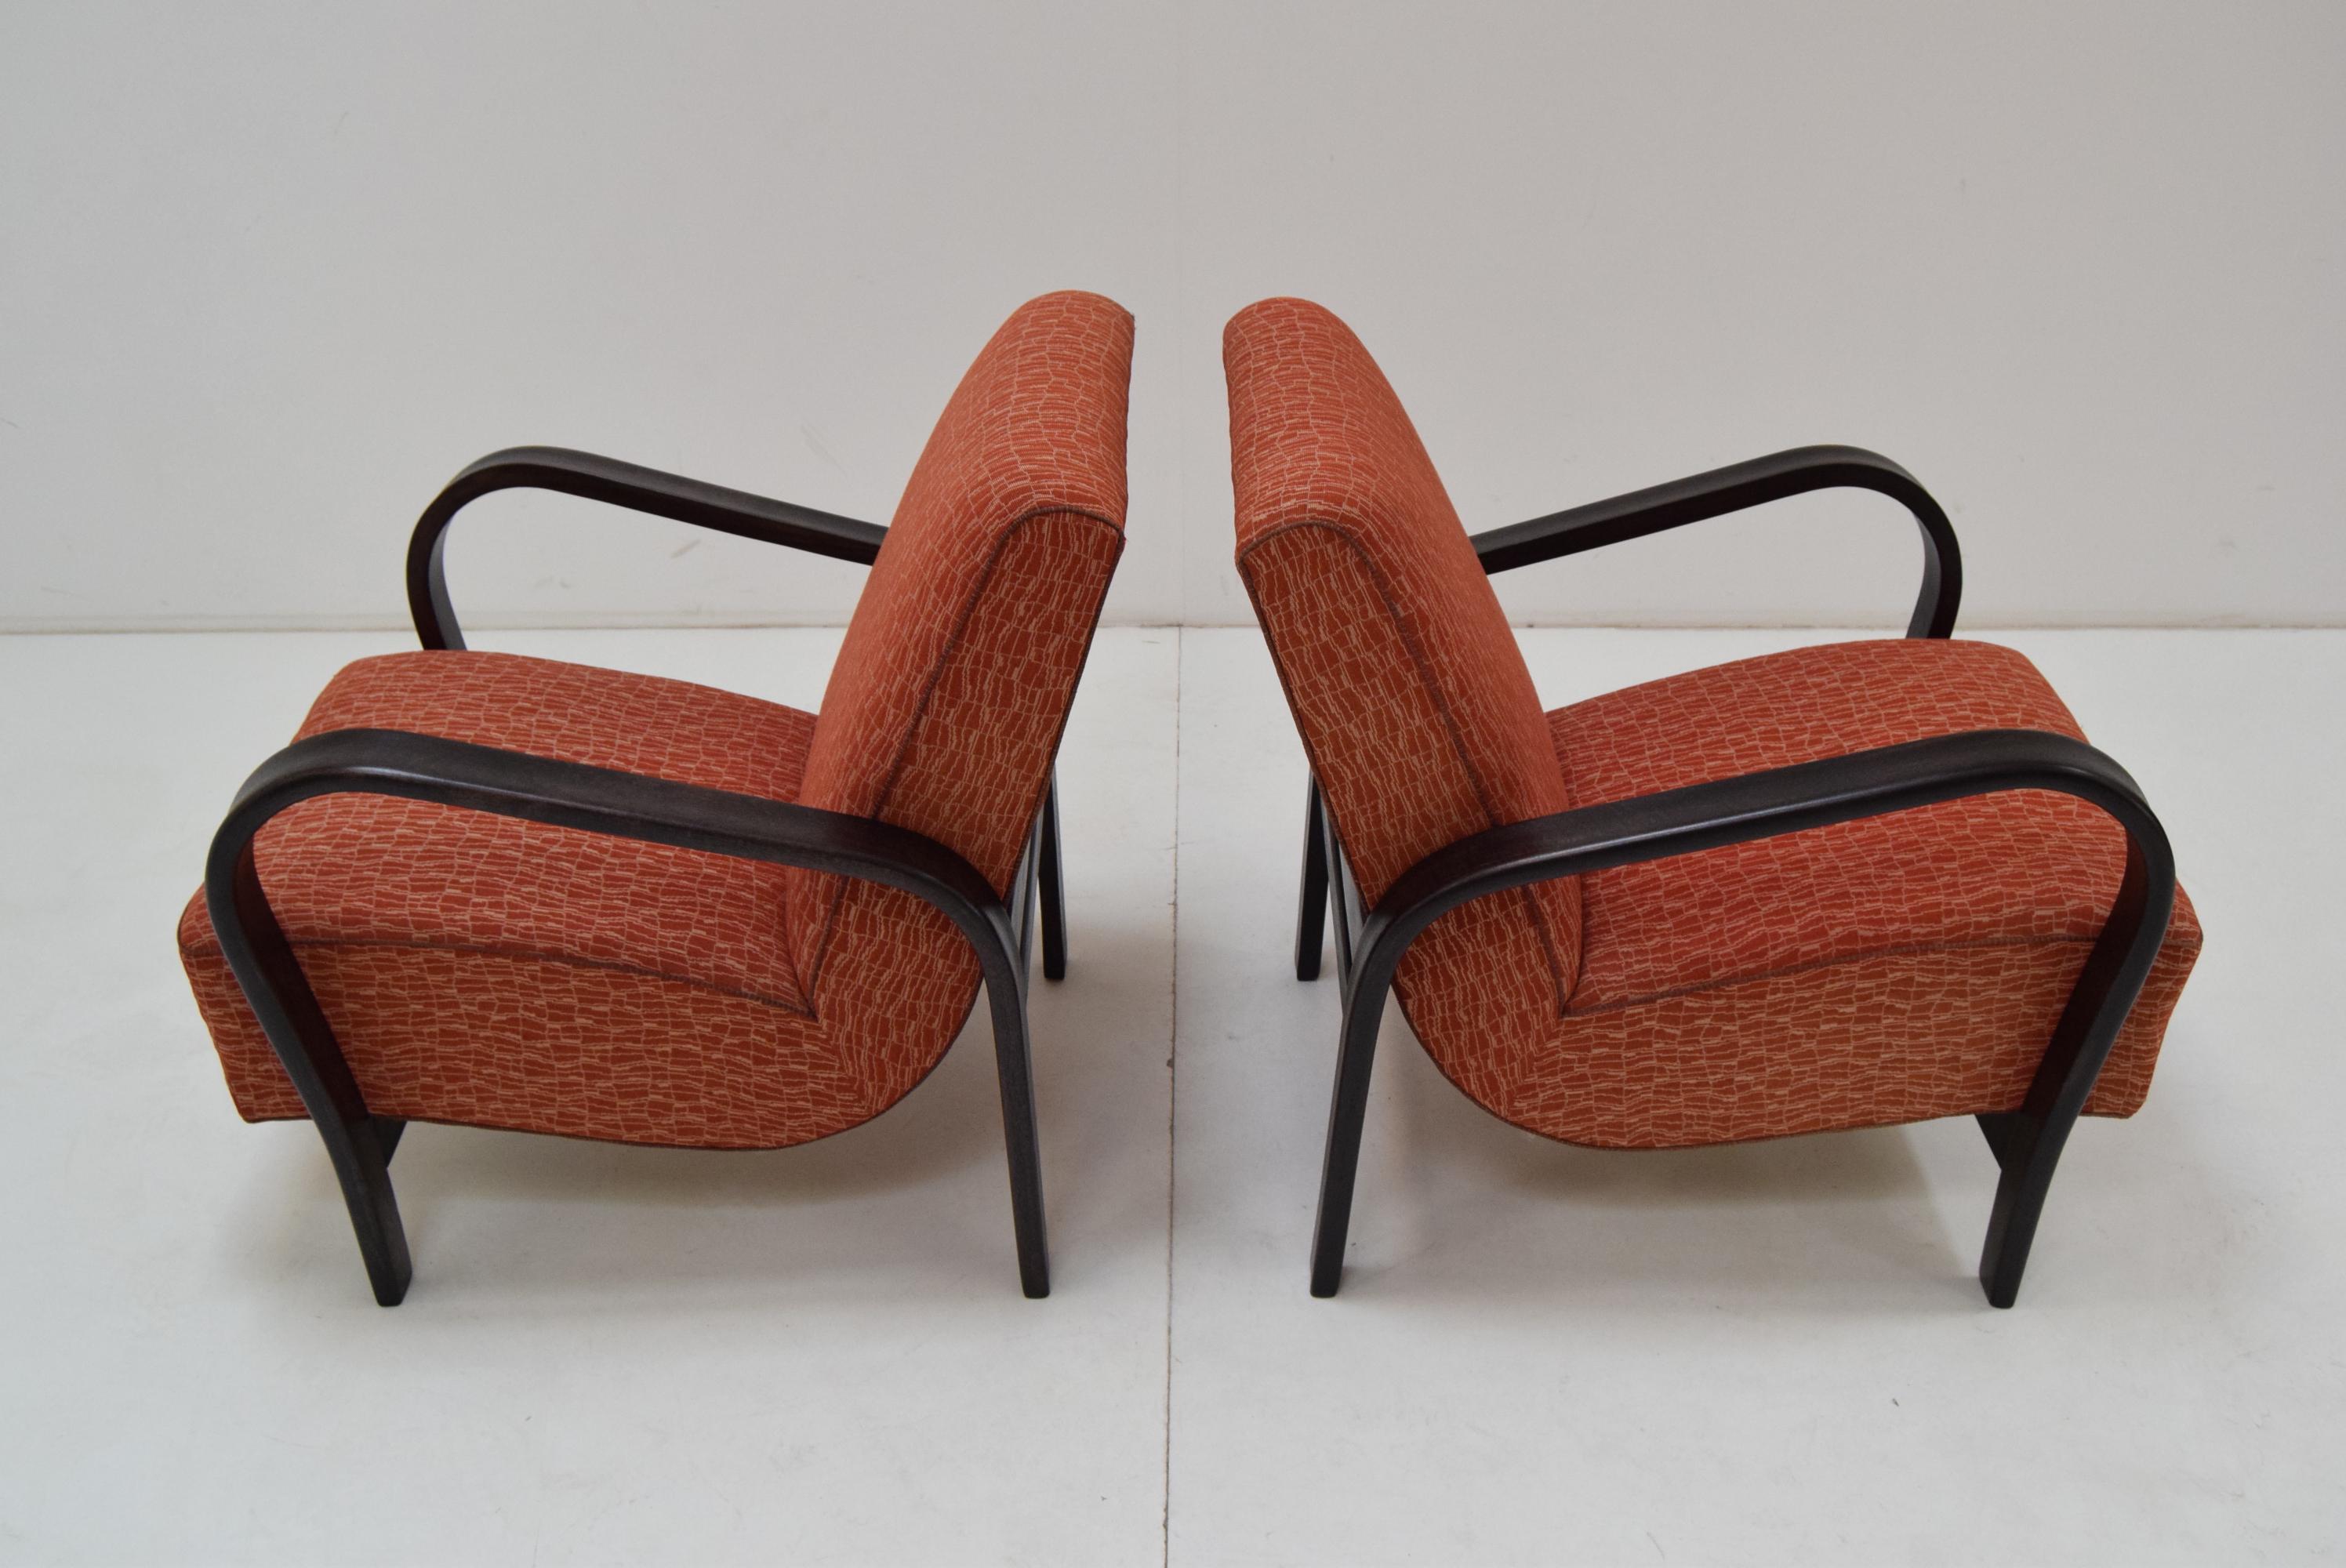 Pair of Art Deco Design Armchairs by Kropacek and Kozelka, 1930's For Sale 1